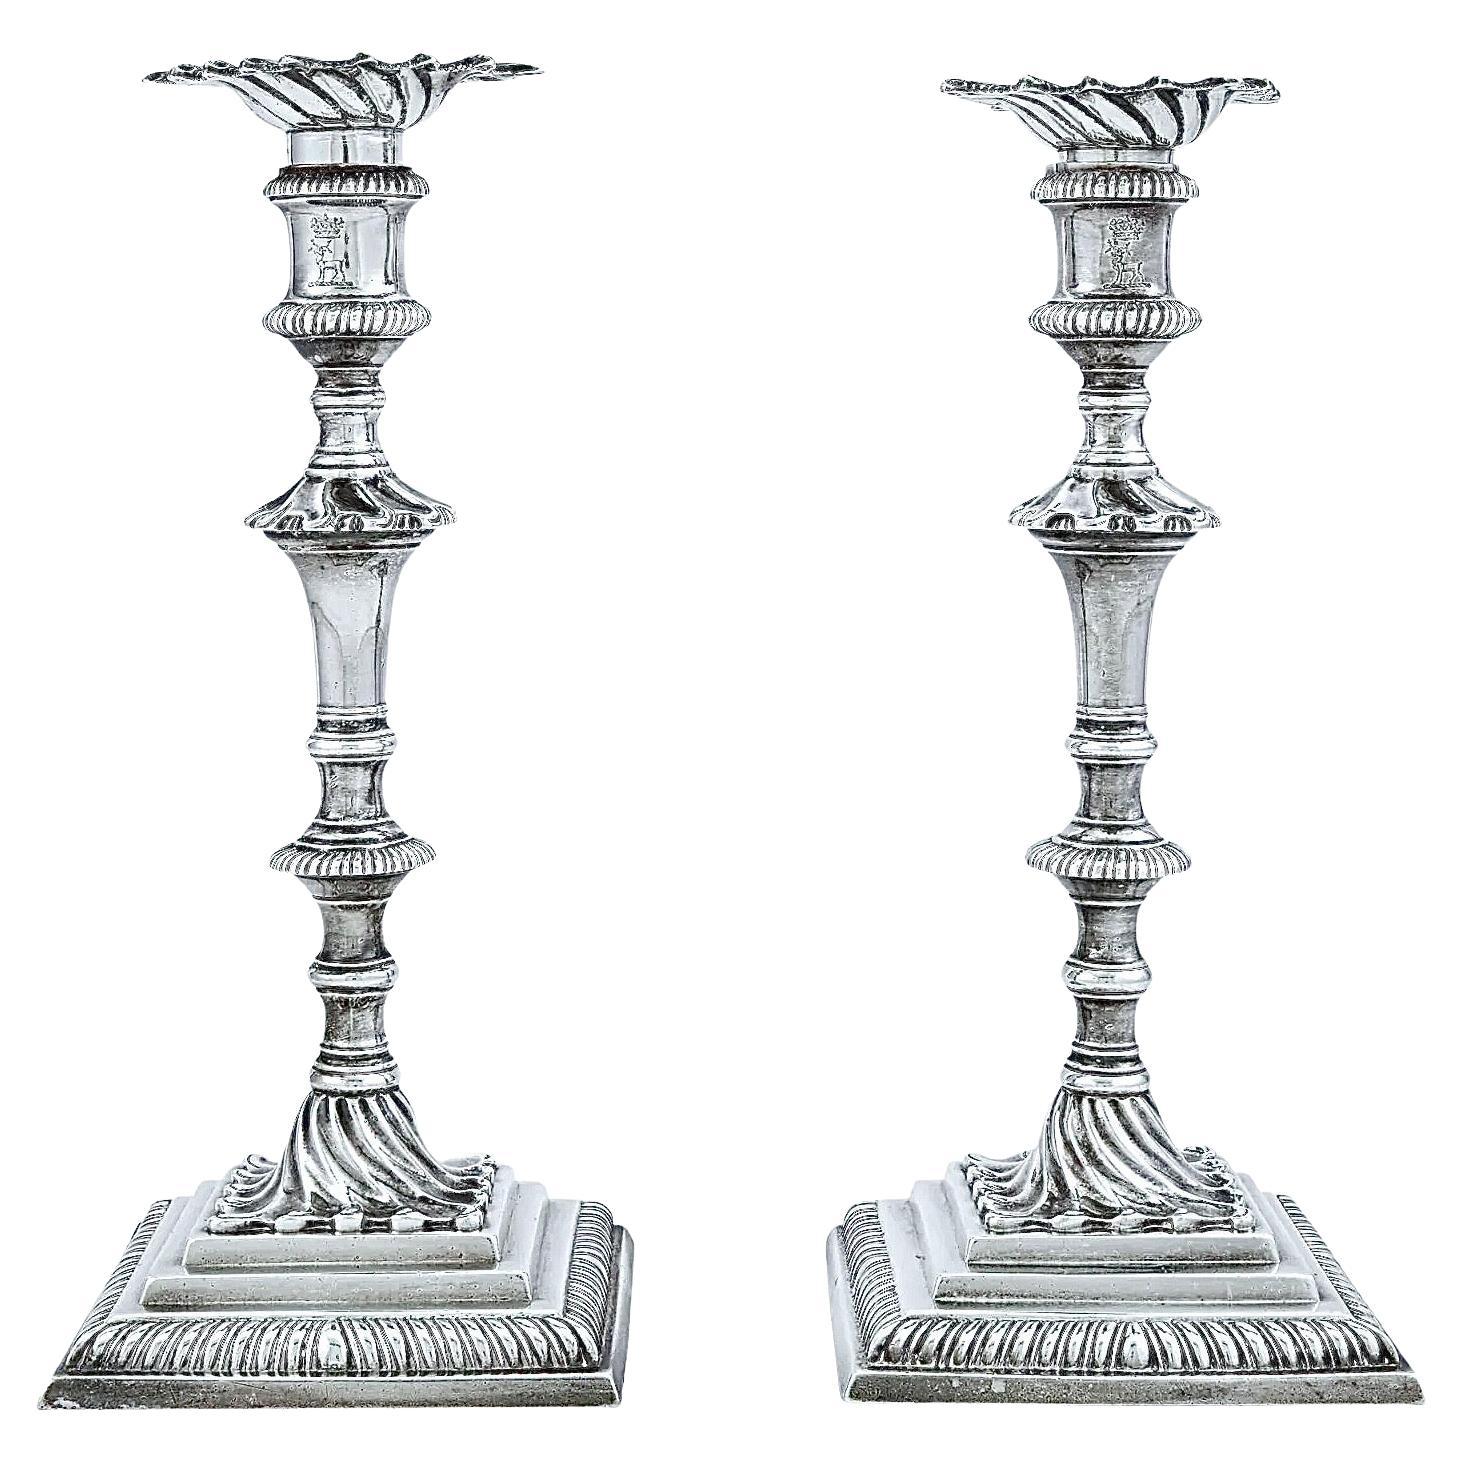 1763 Pair of George III Sterling Silver Candlesticks by William Cafe, English